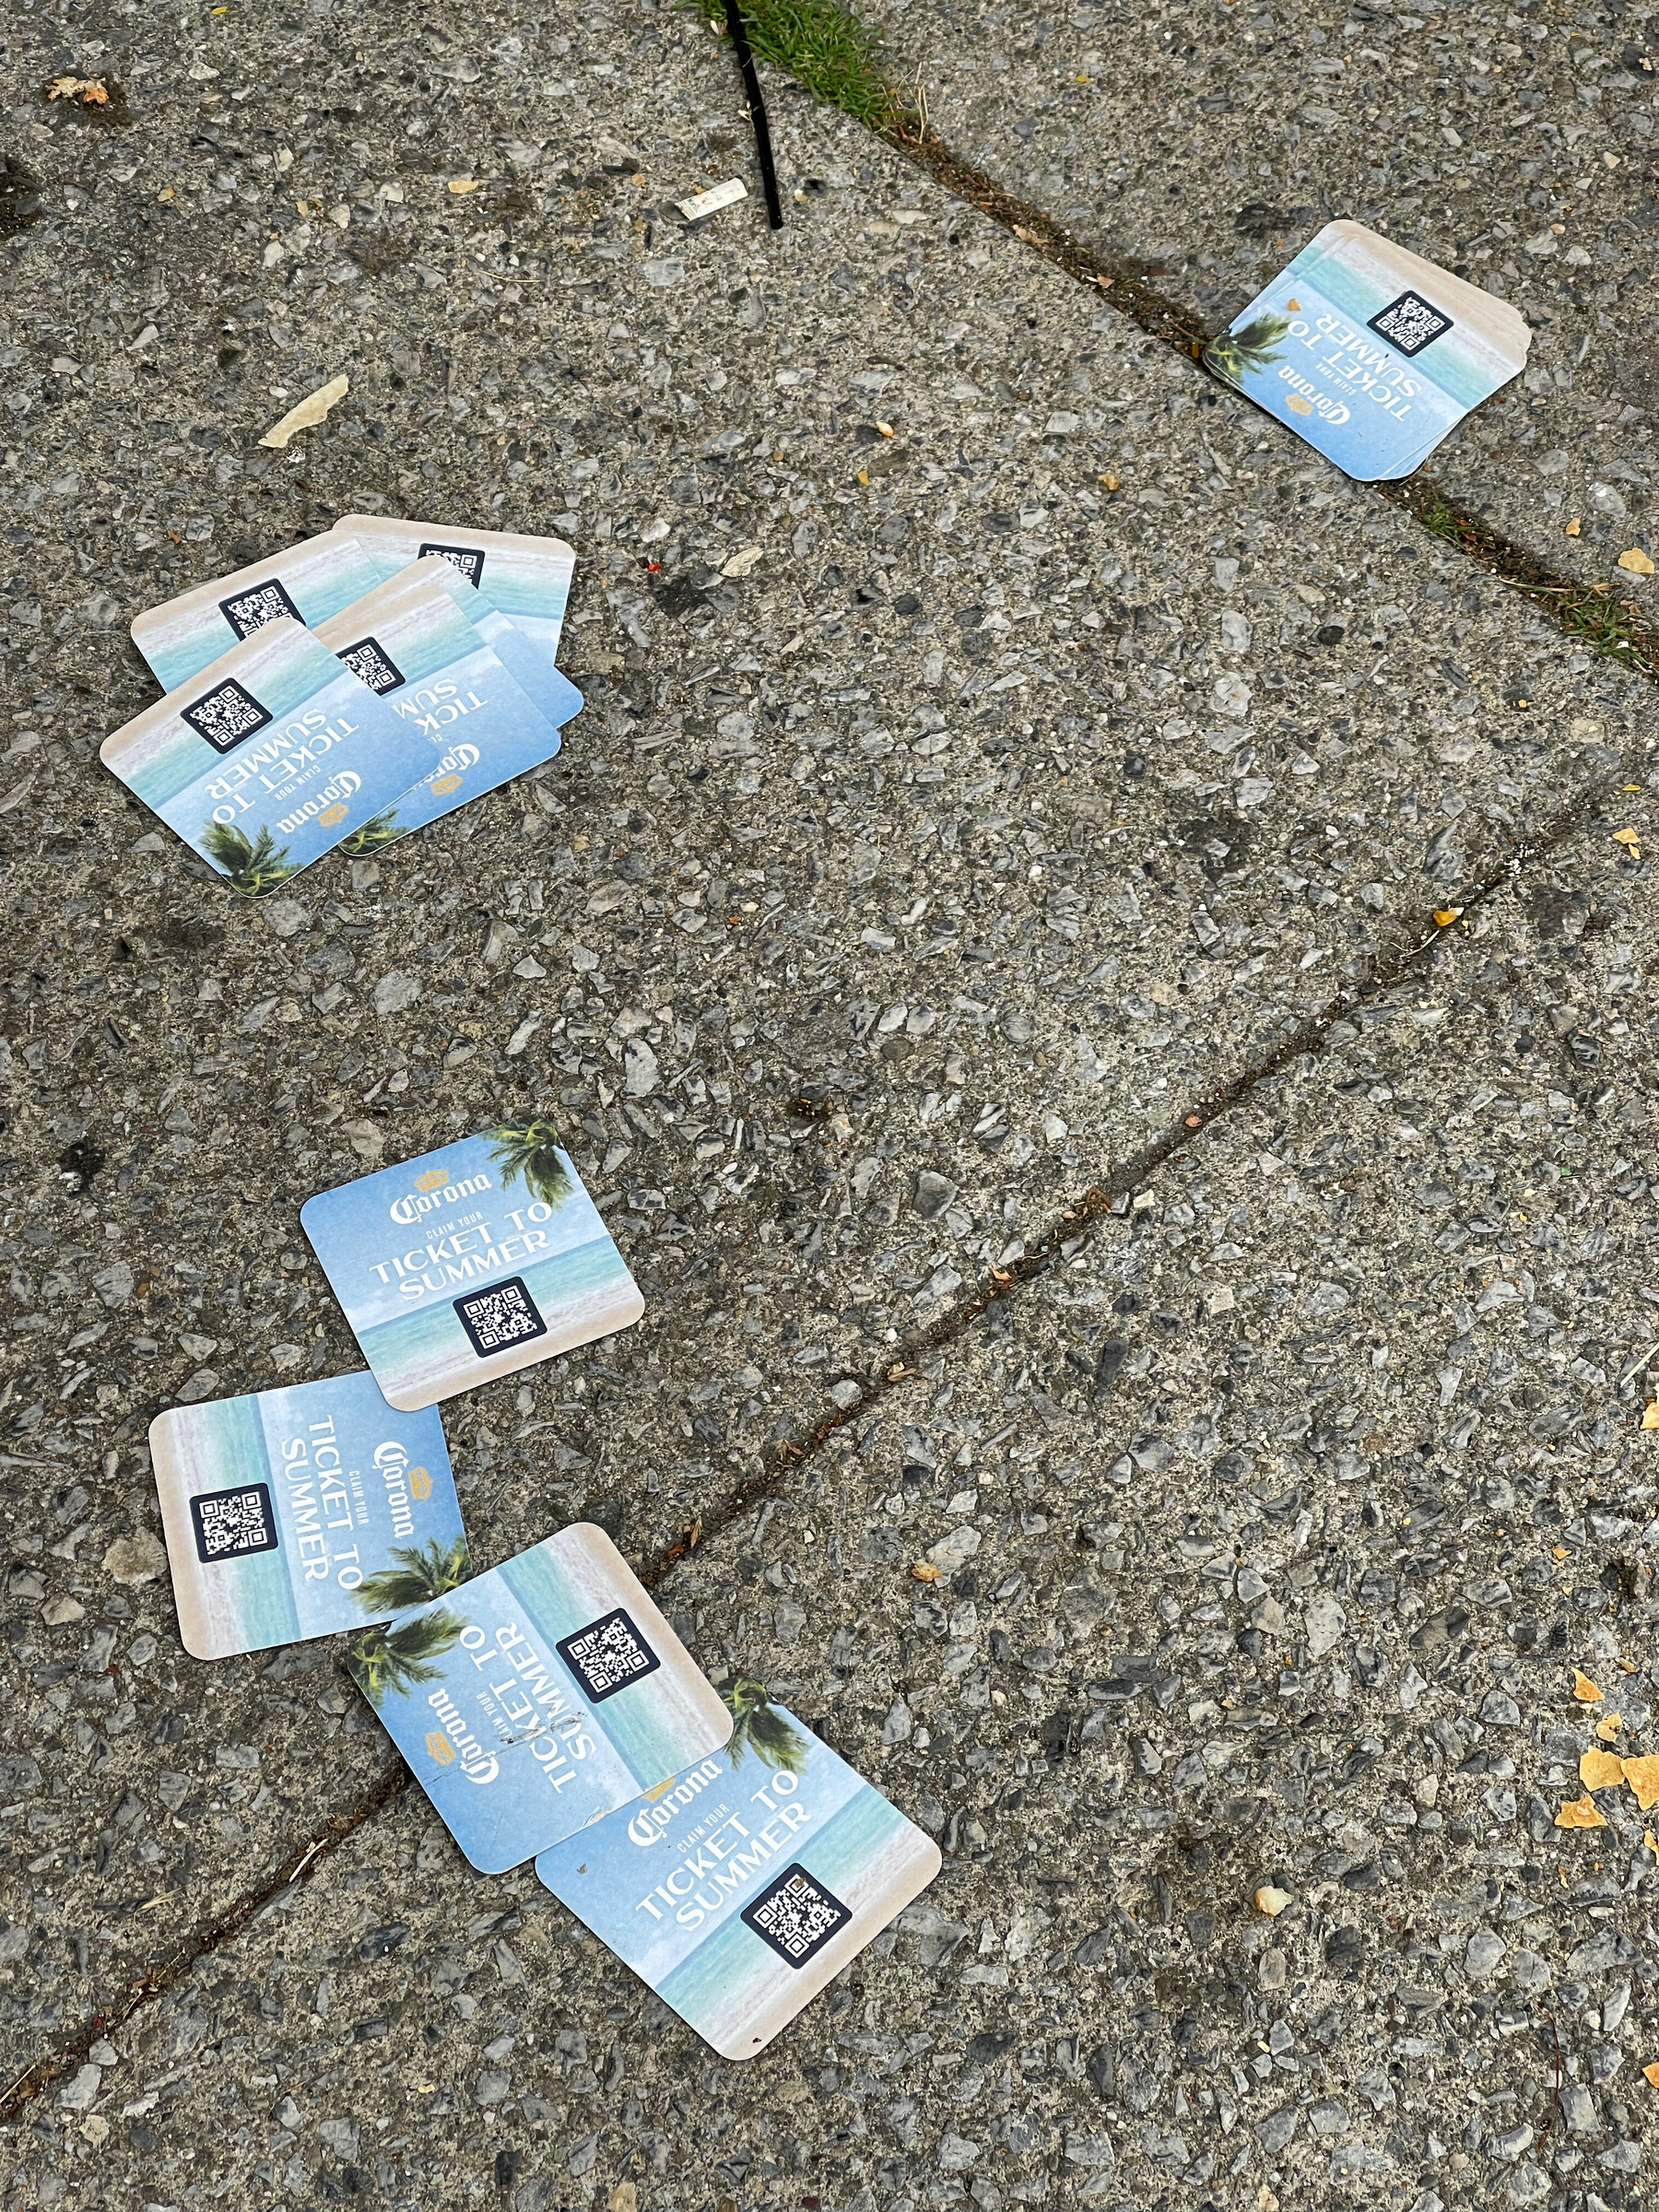 Corona beer cards strewn across the pavement.